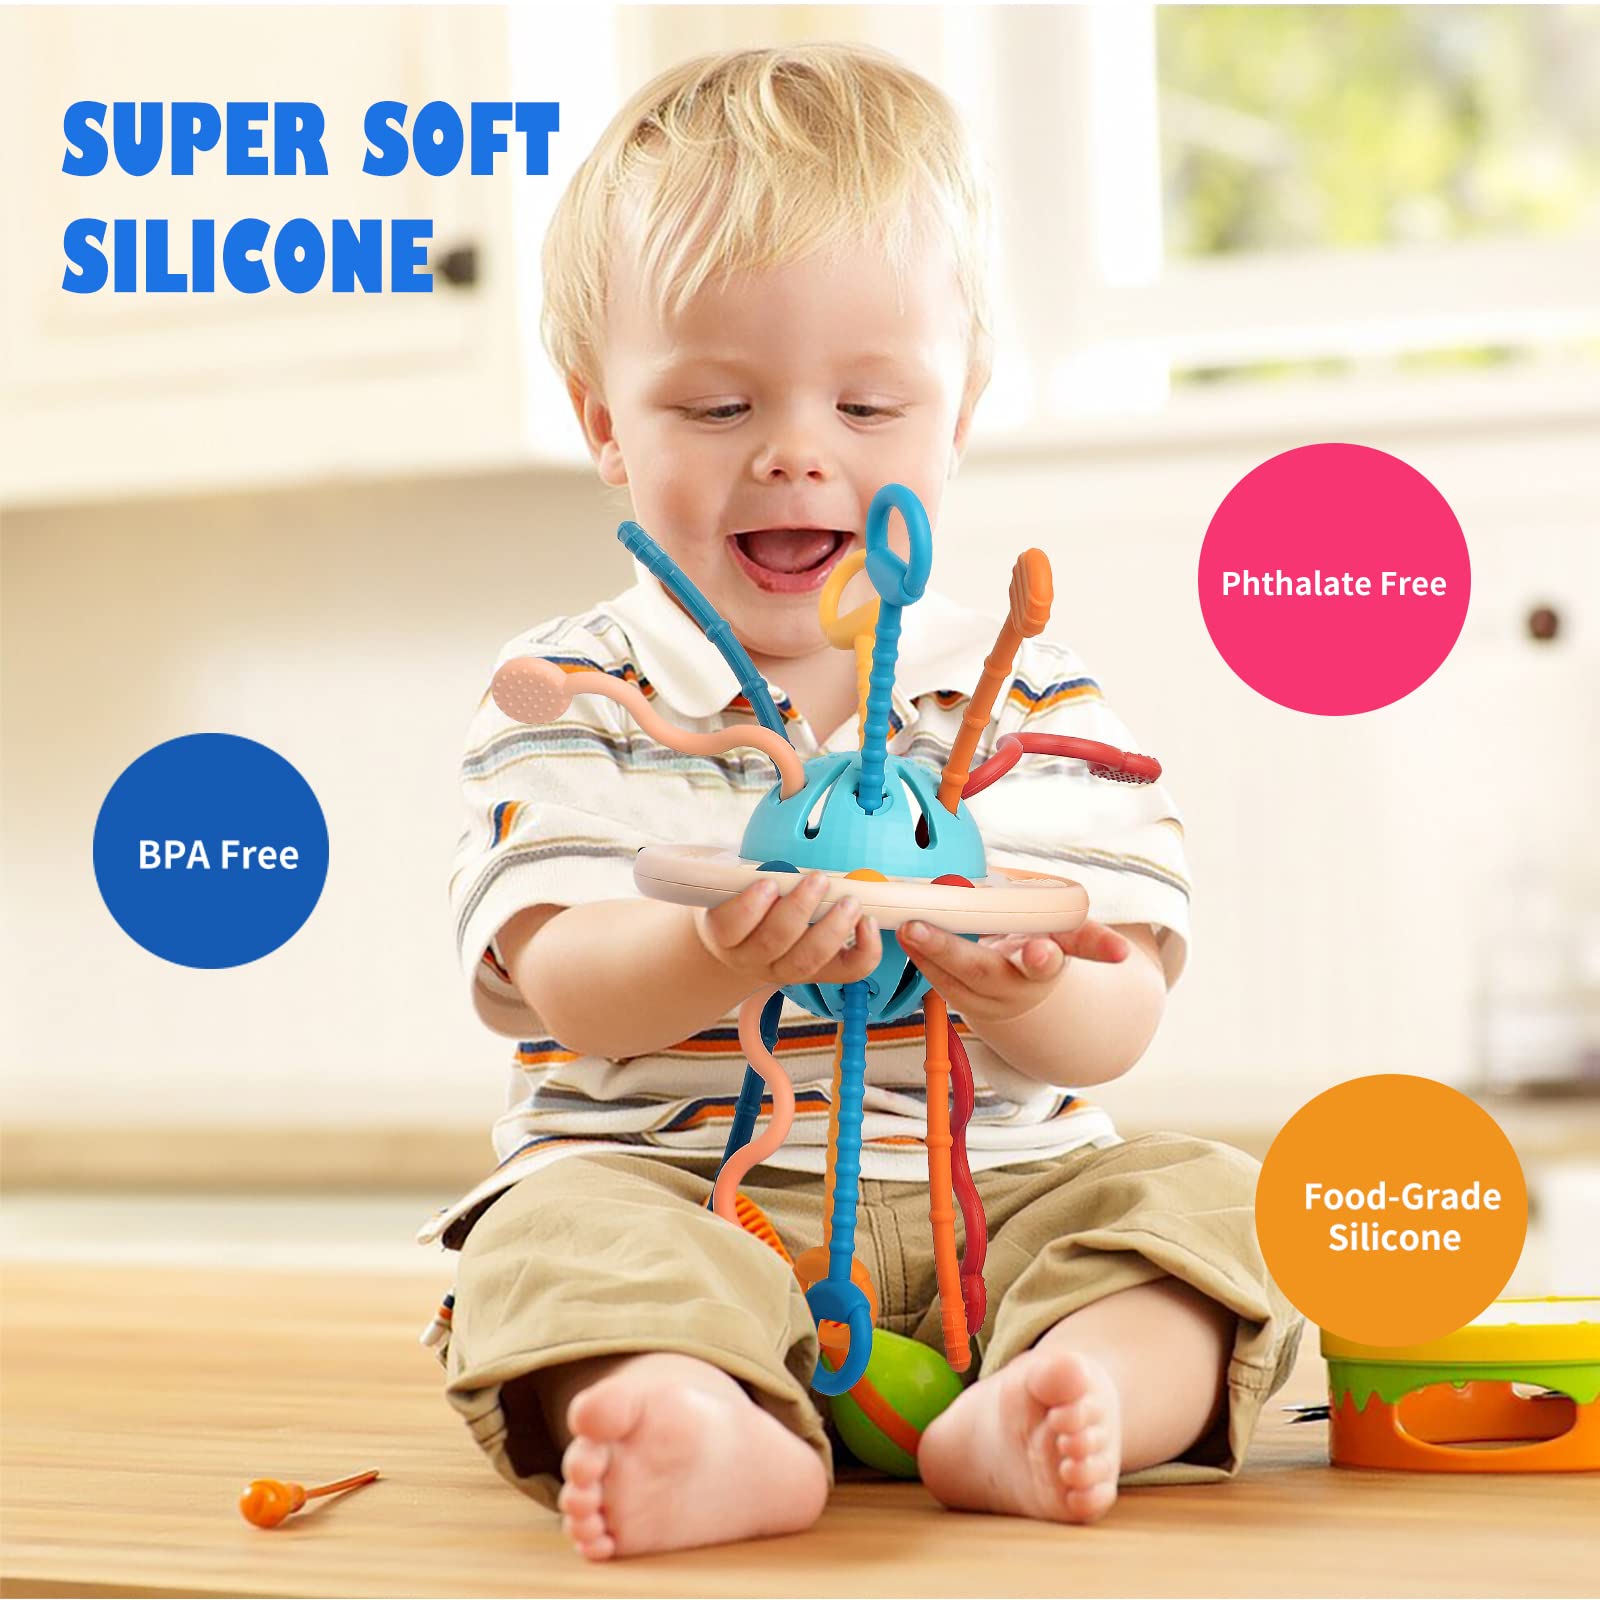 Montessori Toys for Babies 6-12 Months, Baby Sensory Toys for Toddler, Baby Toys 12 to 18 Months, Food-Grade Silicone Pull String Toy for Sensory Development, Travel Toys for 1 Year Old Birthday Gift